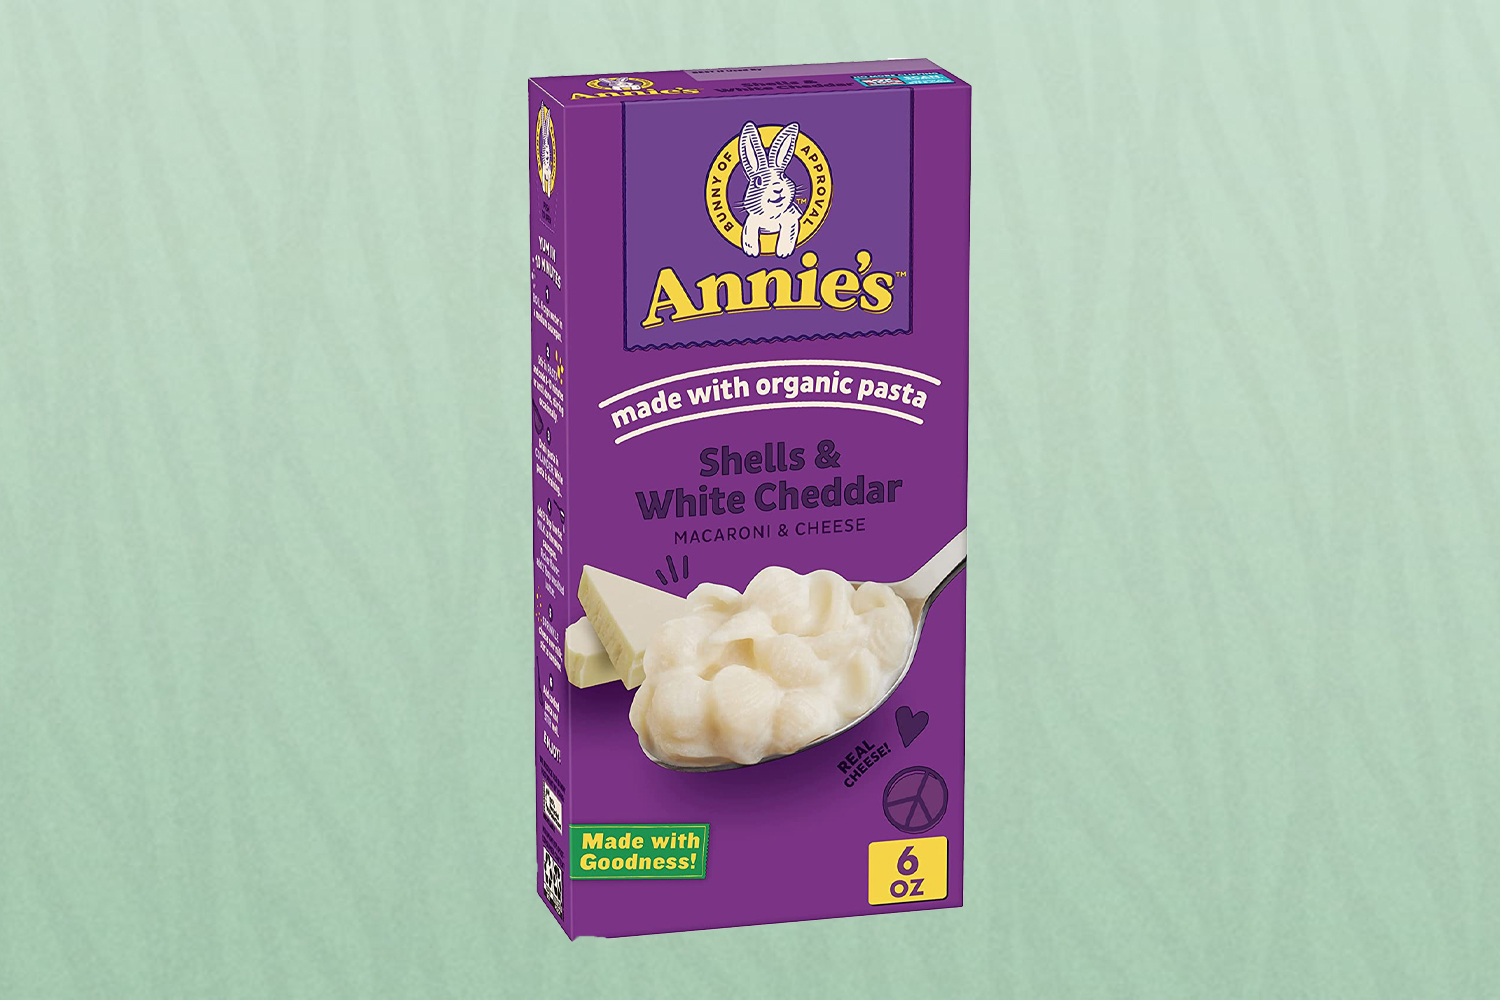 Annie's Macaroni & Cheese Shells is the best mac and cheese to eat while stoned in 2022